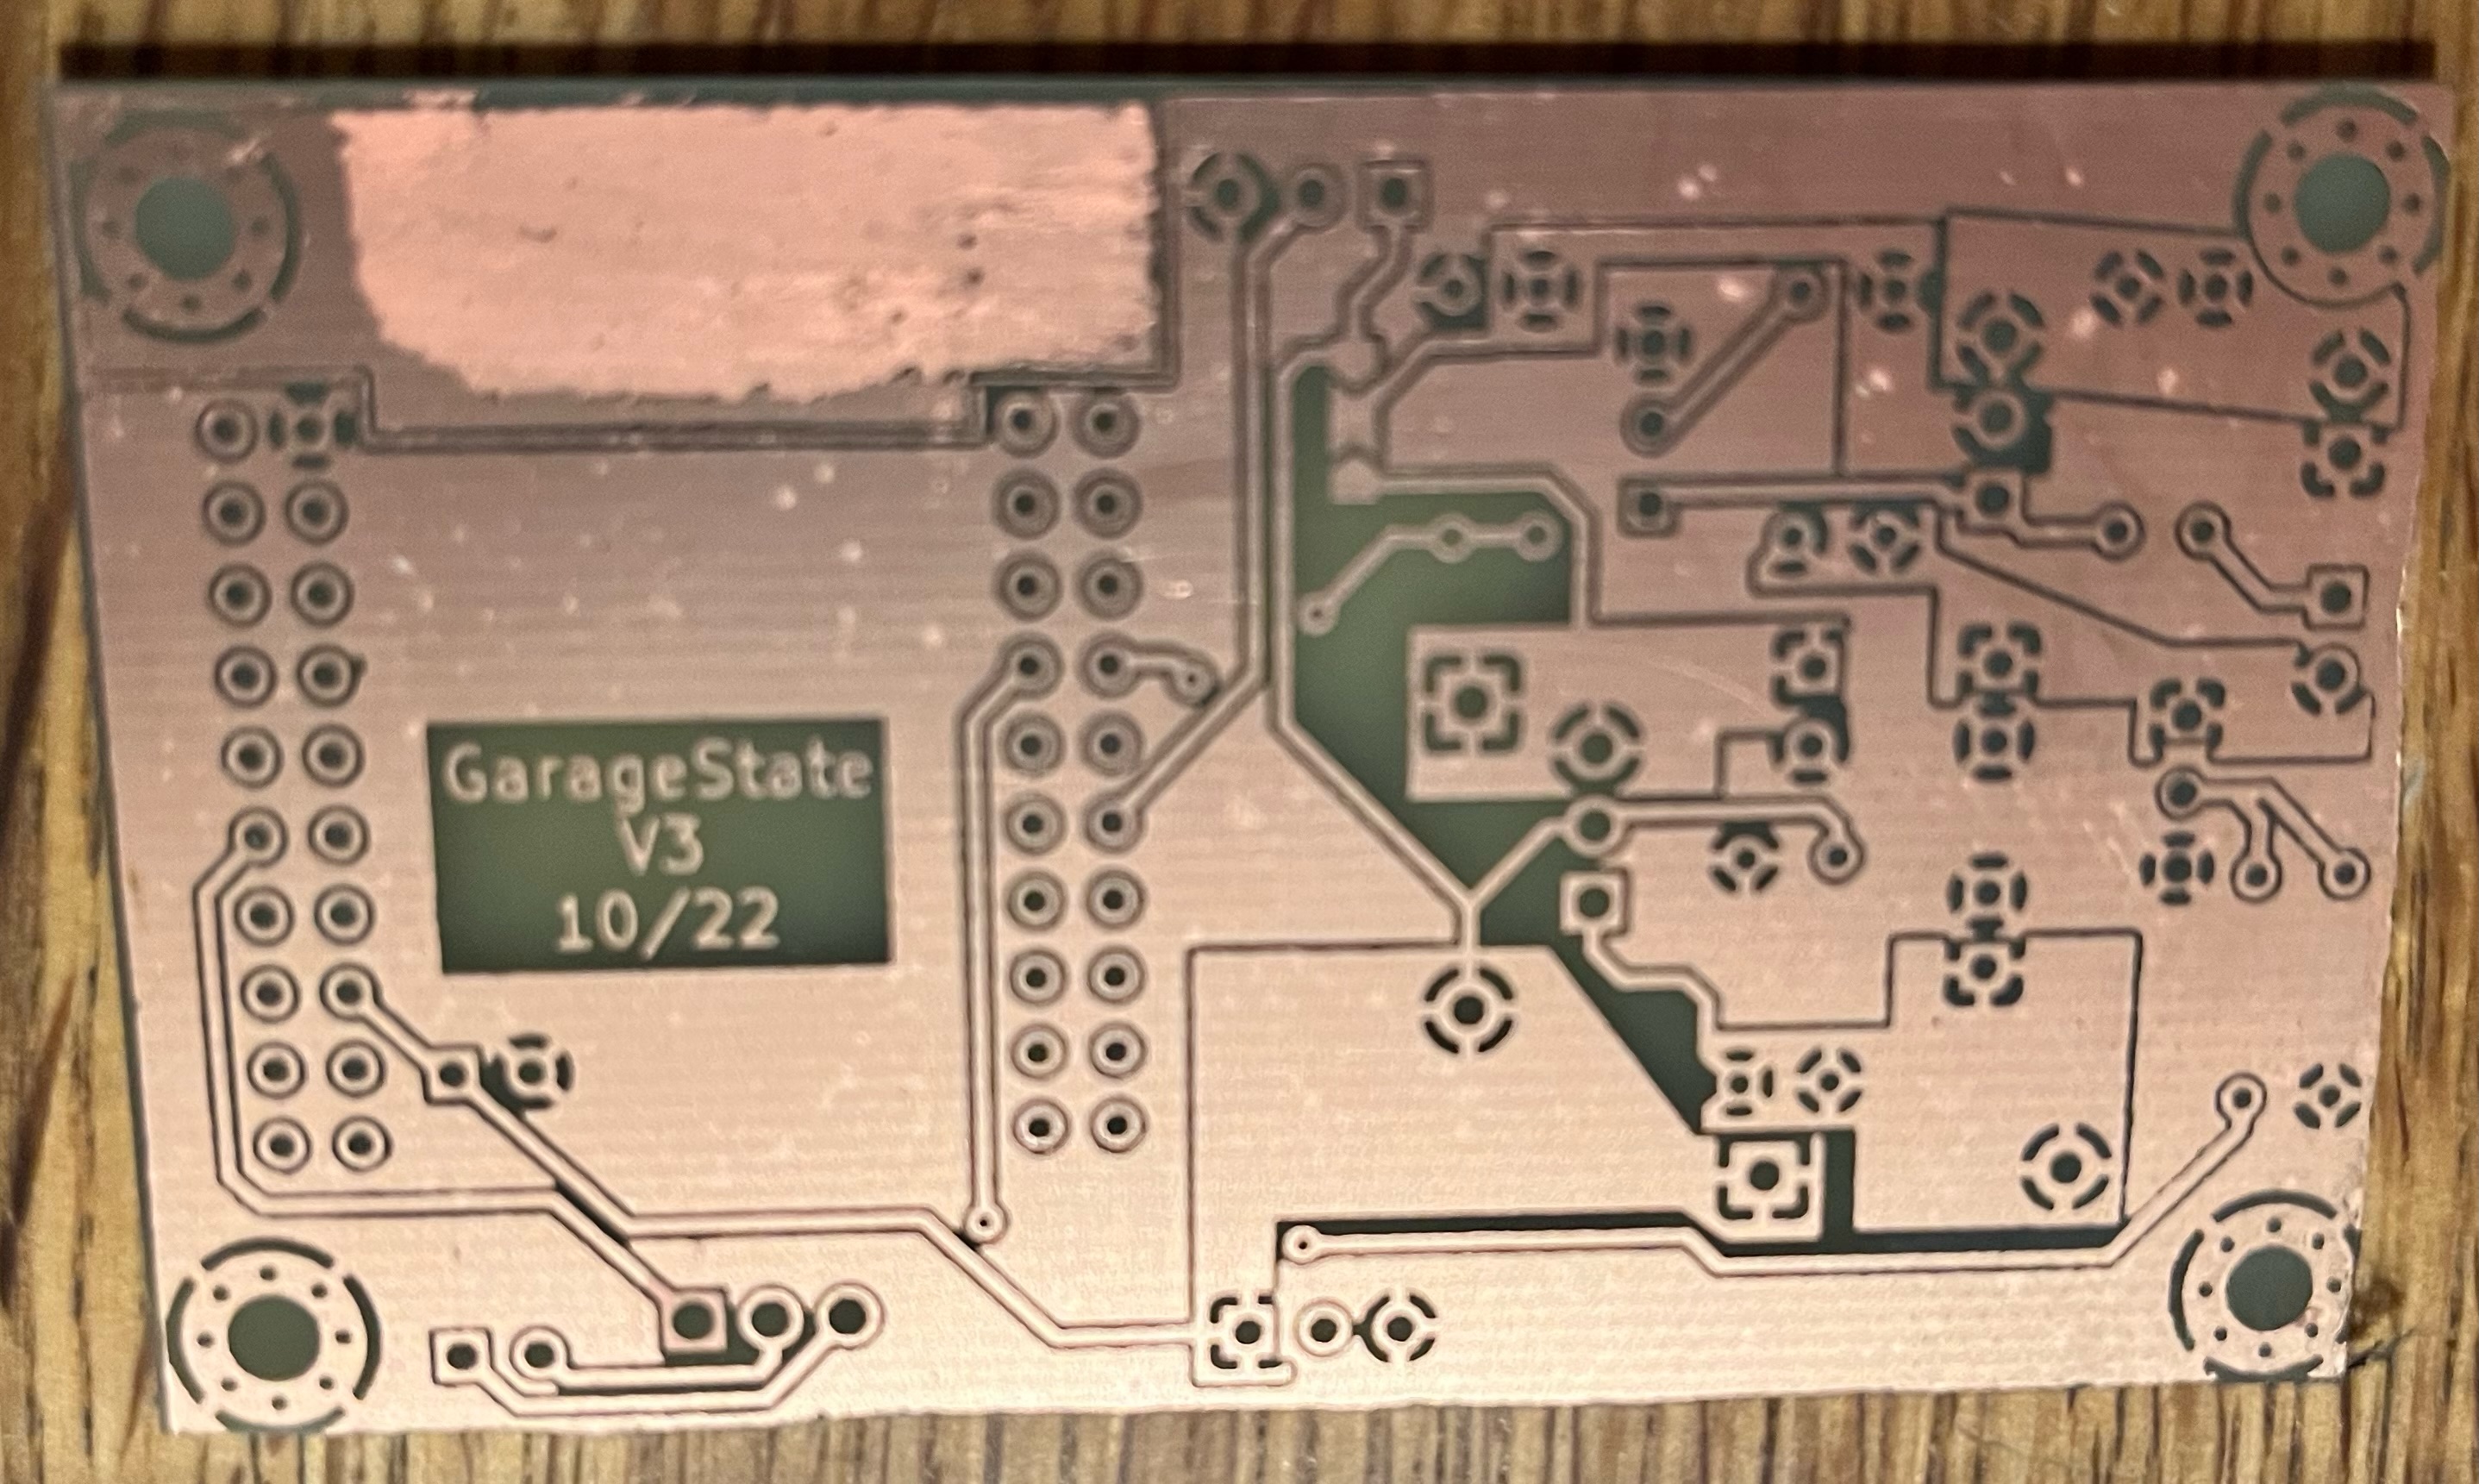 The etched PCB